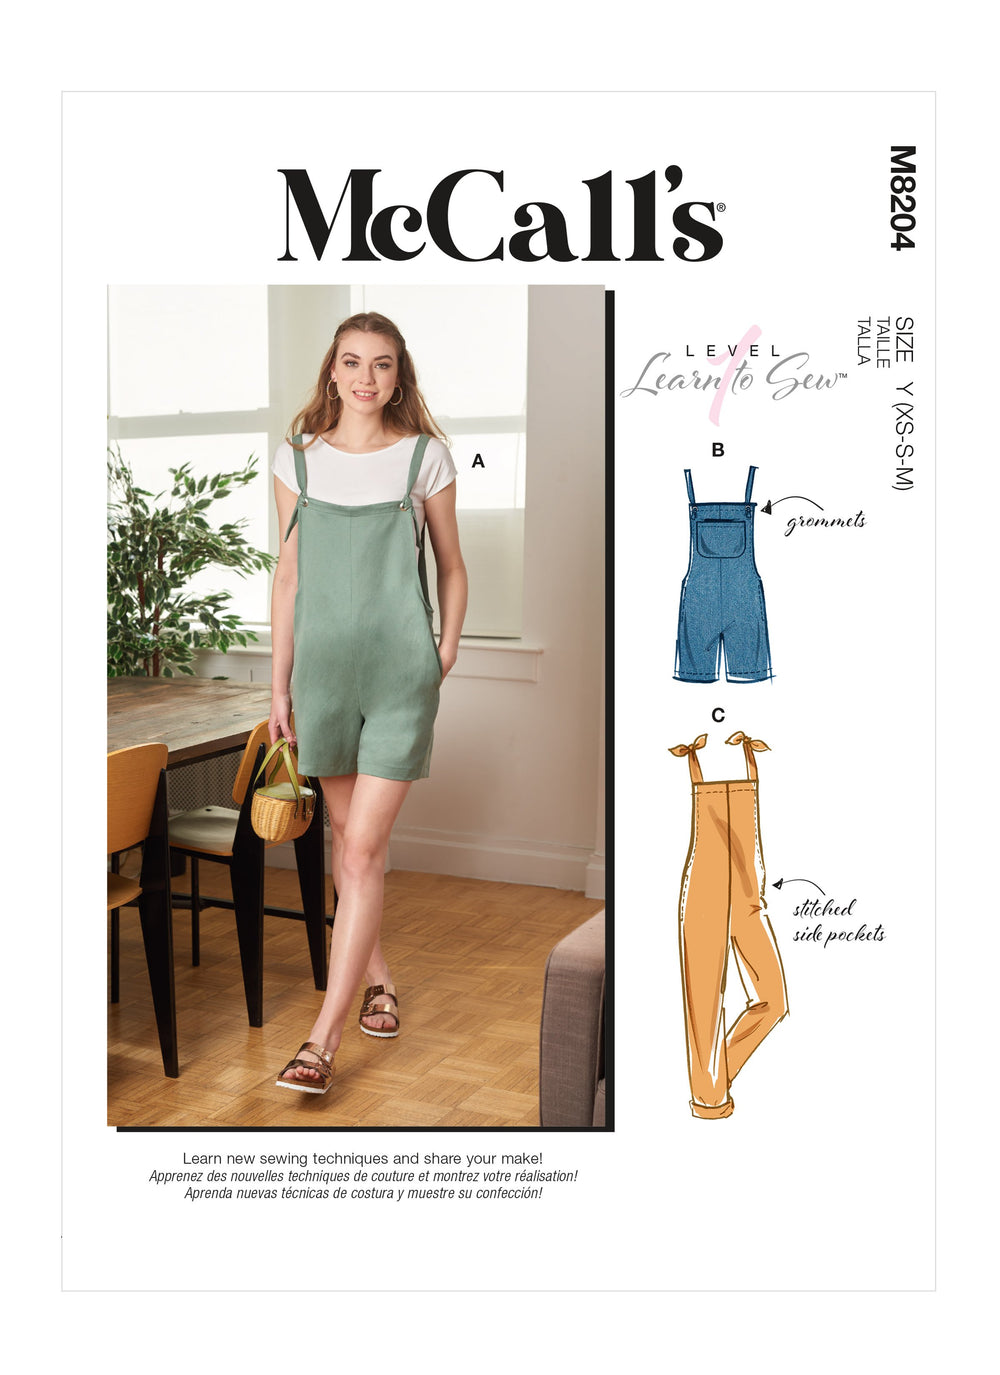 McCalls Sewing Pattern 8345 (E5) - Misses Skirt Overalls, FREE Delivery  Available